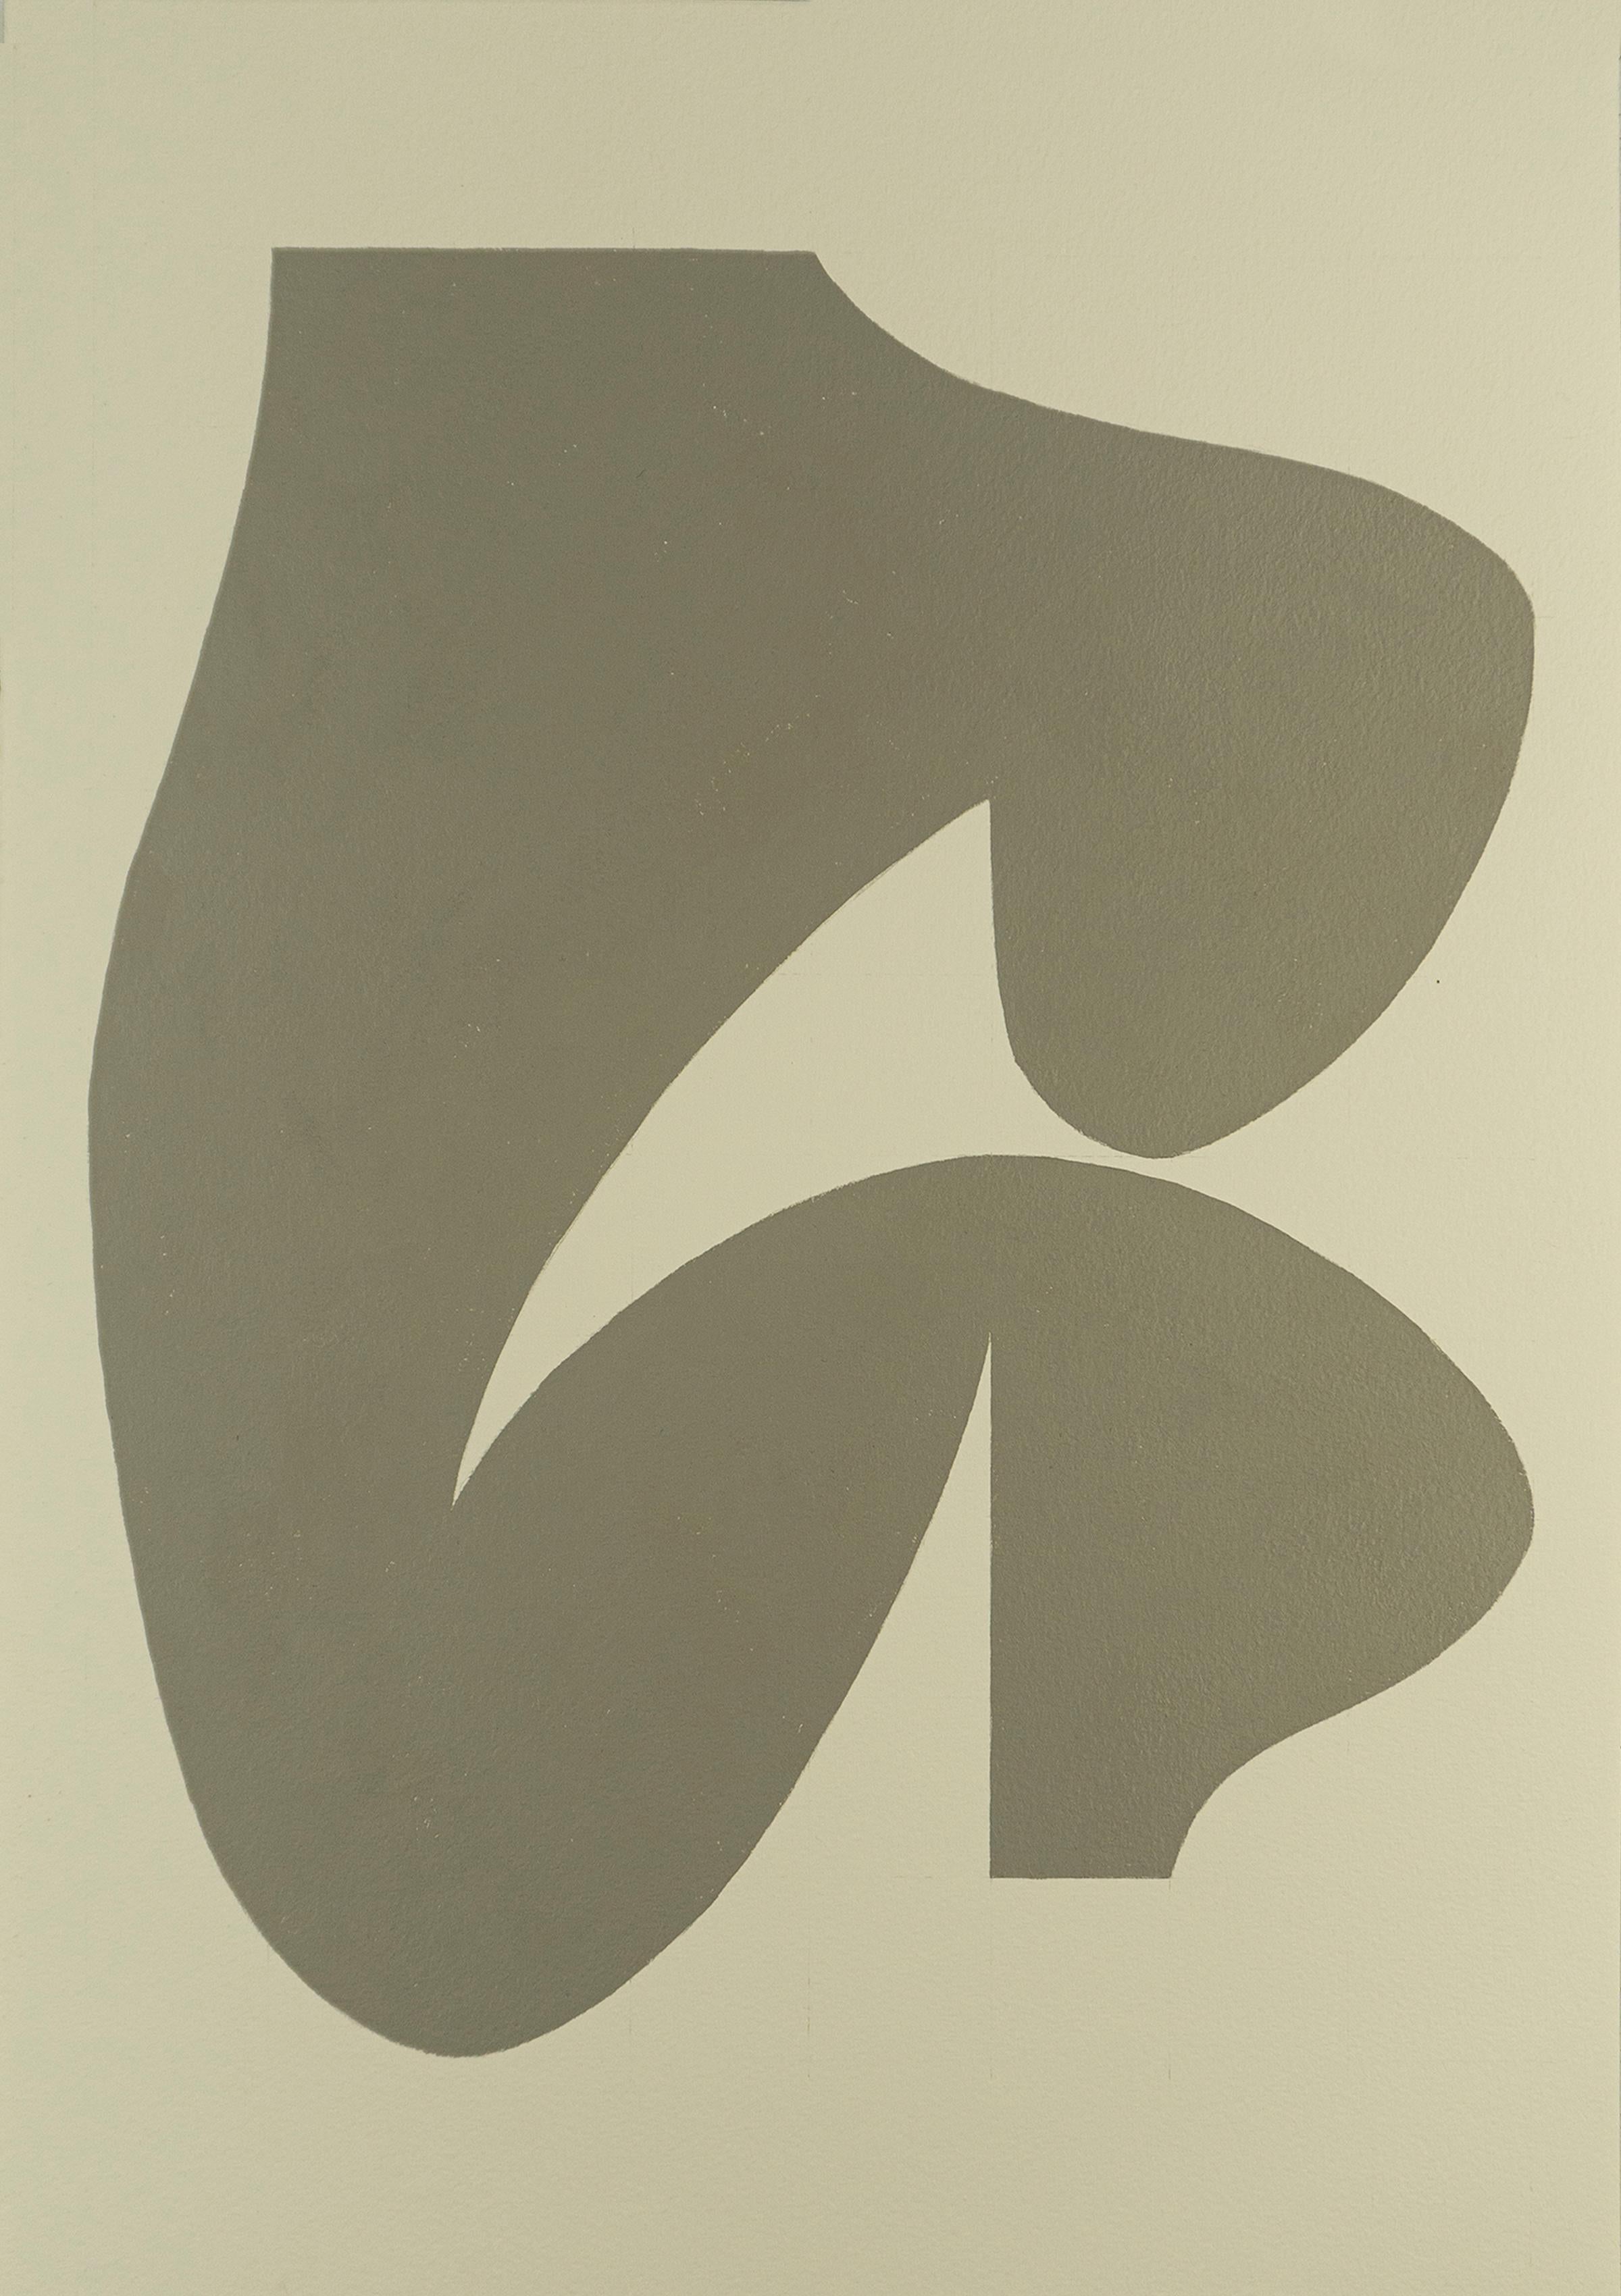 Ryan Park Abstract Drawing - Shape 32 (2019) - Abstract shape, minimalist work on paper, neutral gray & white